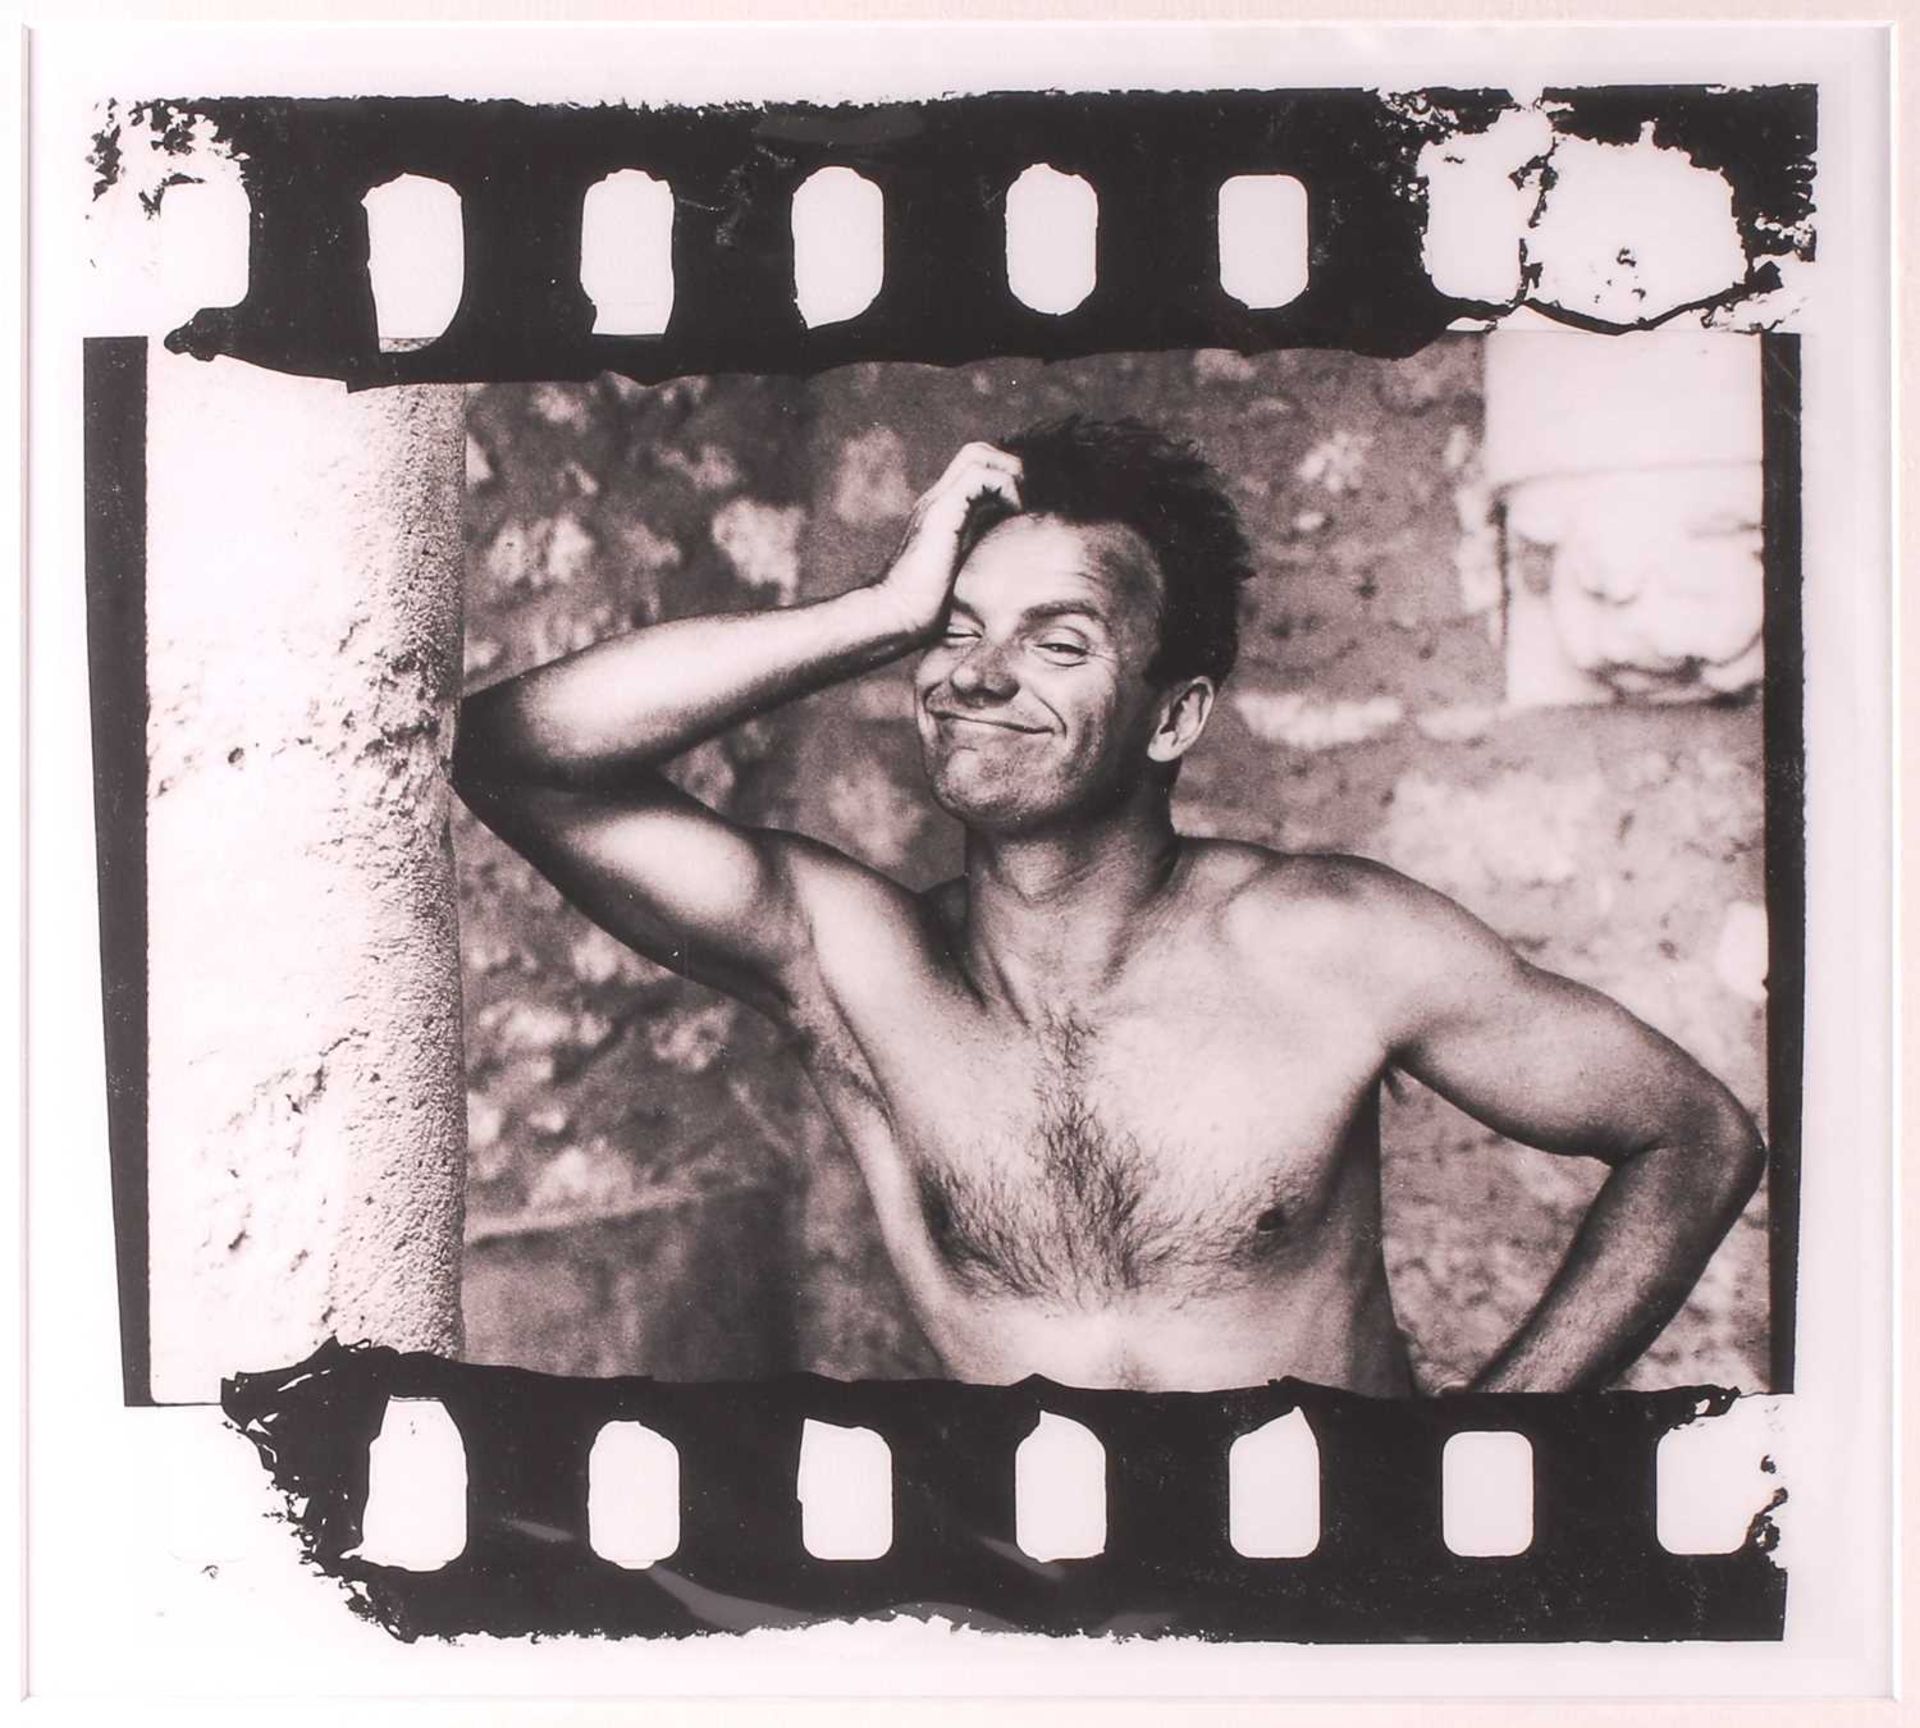 Brian Aris (contemporary), Sting, a black and white photographic print, 35 cm x 39 cm in a mount (